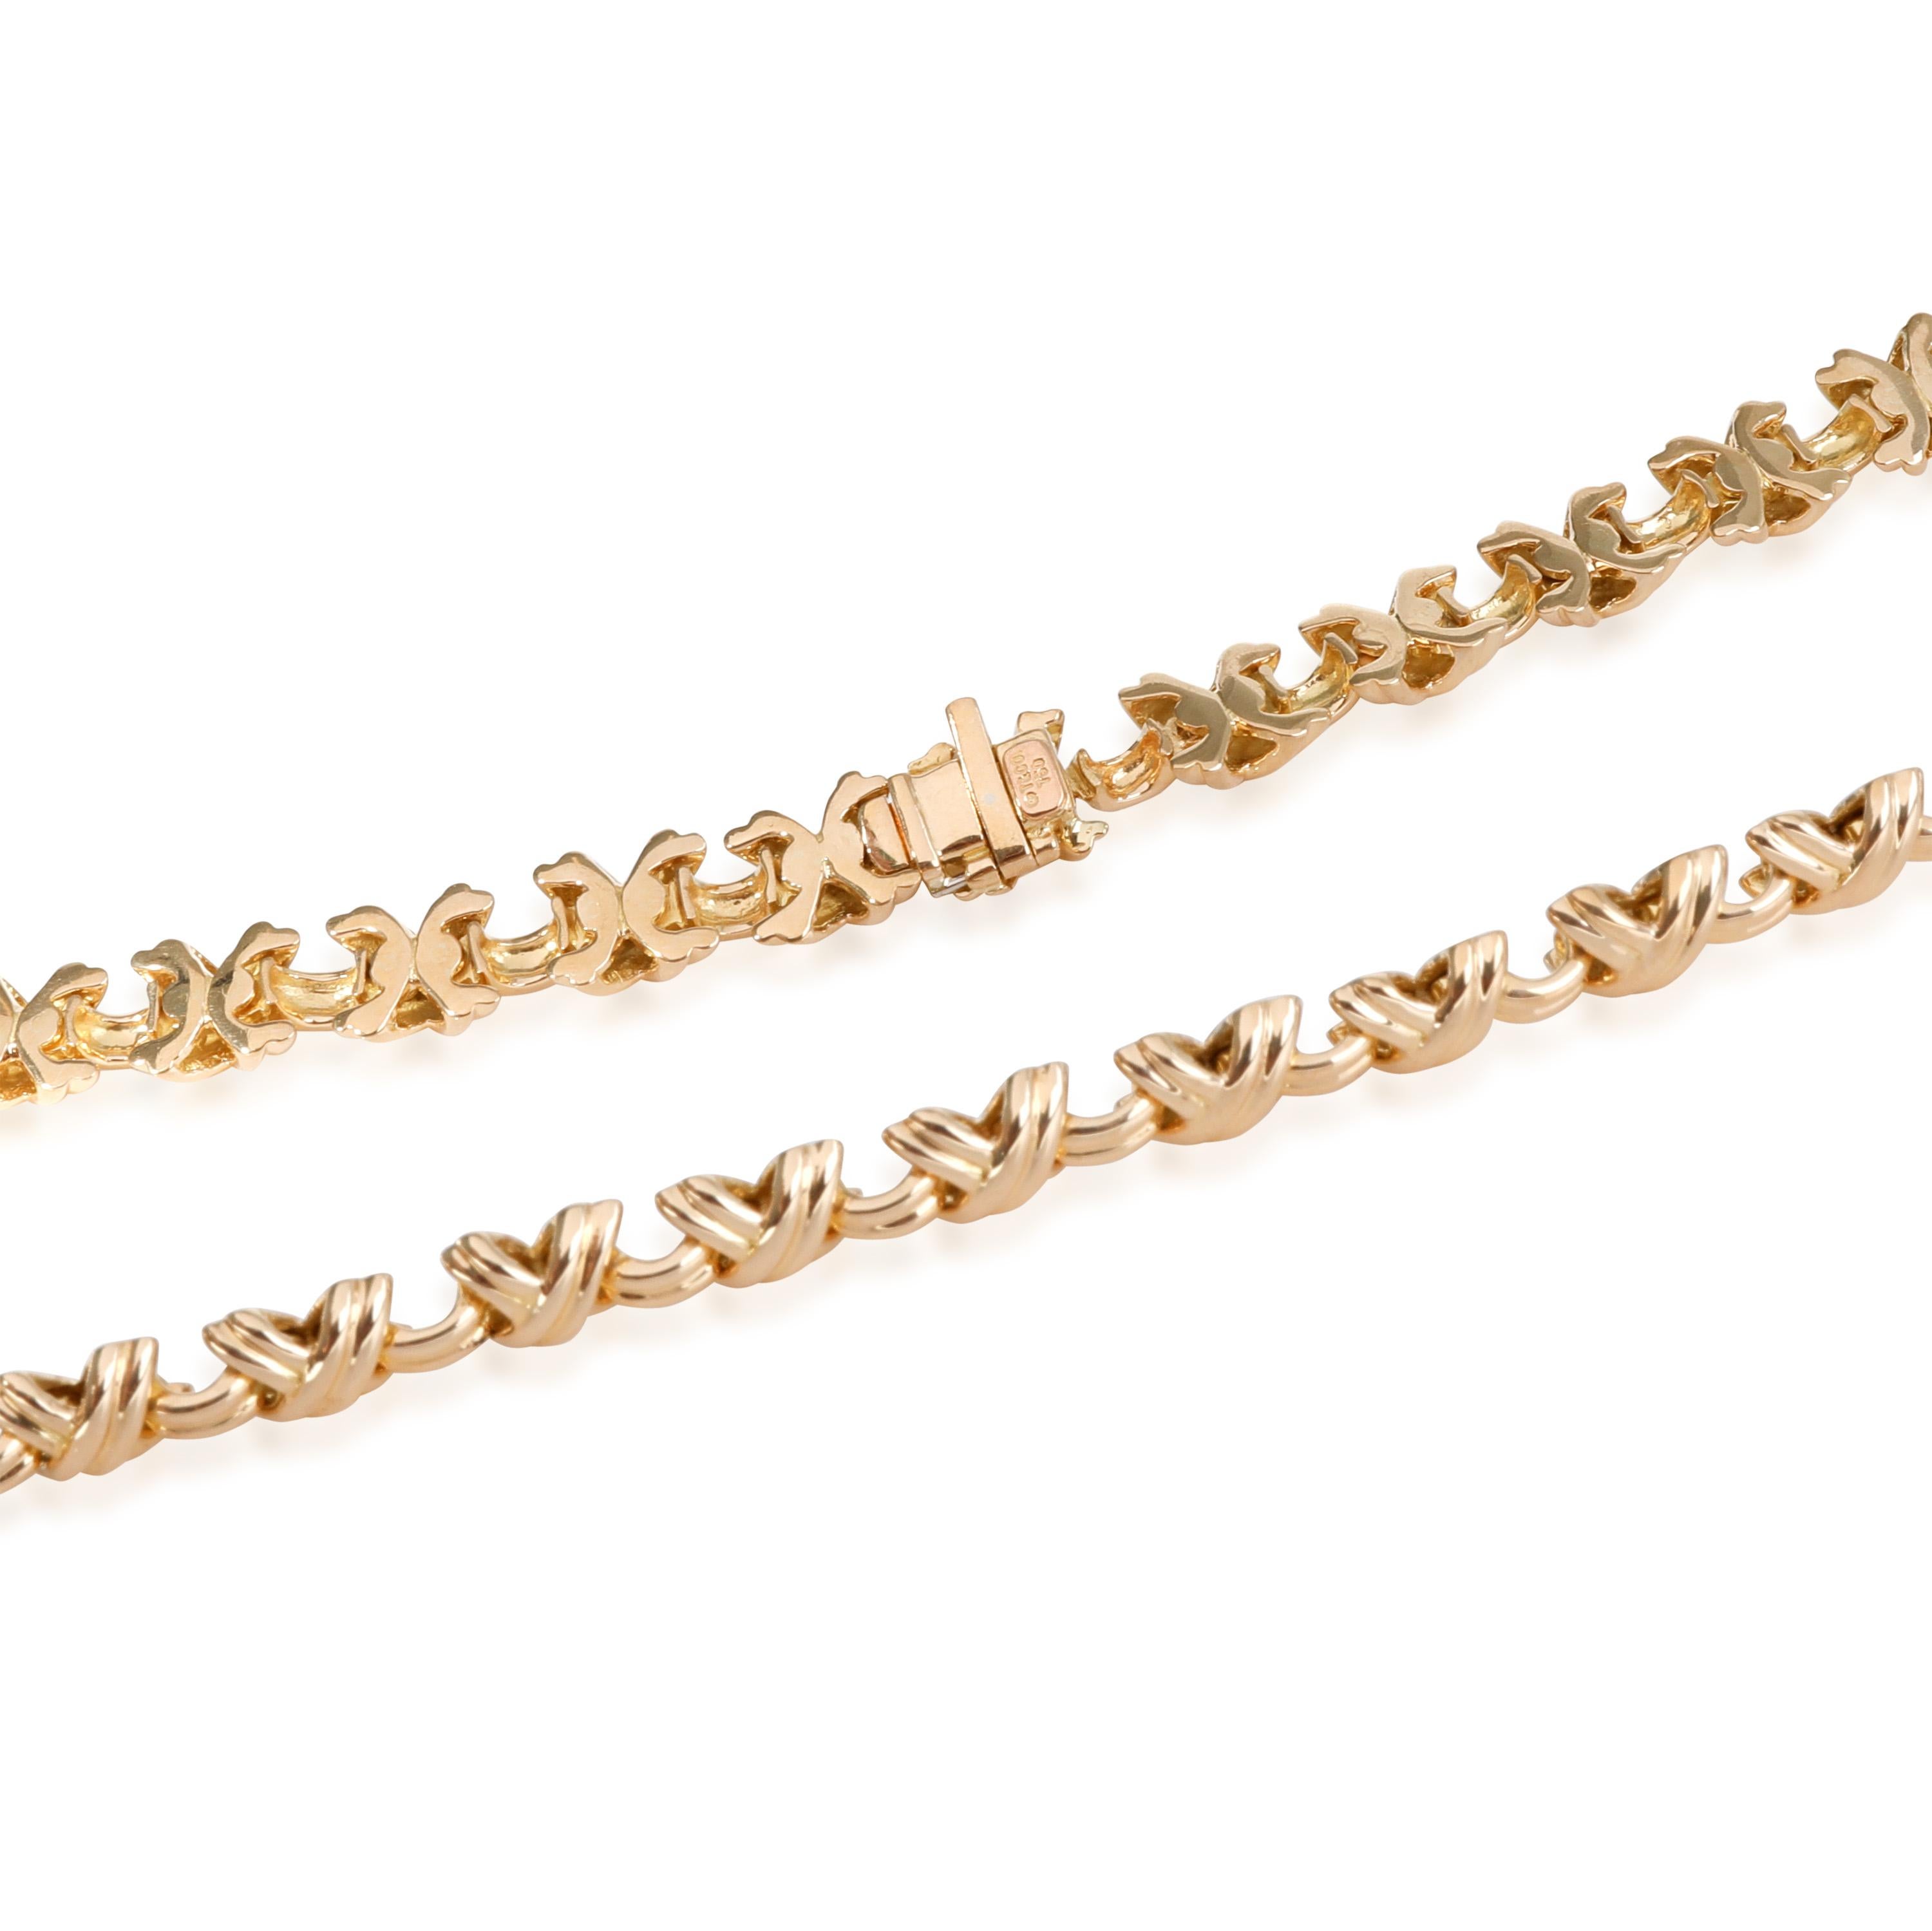 Tiffany & Co. Vintage X Collar Necklace in 18k Yellow Gold

PRIMARY DETAILS
SKU: 118774
Listing Title: Tiffany & Co. Vintage X Collar Necklace in 18k Yellow Gold
Condition Description: Retails for 13,750 USD. In excellent condition and recently